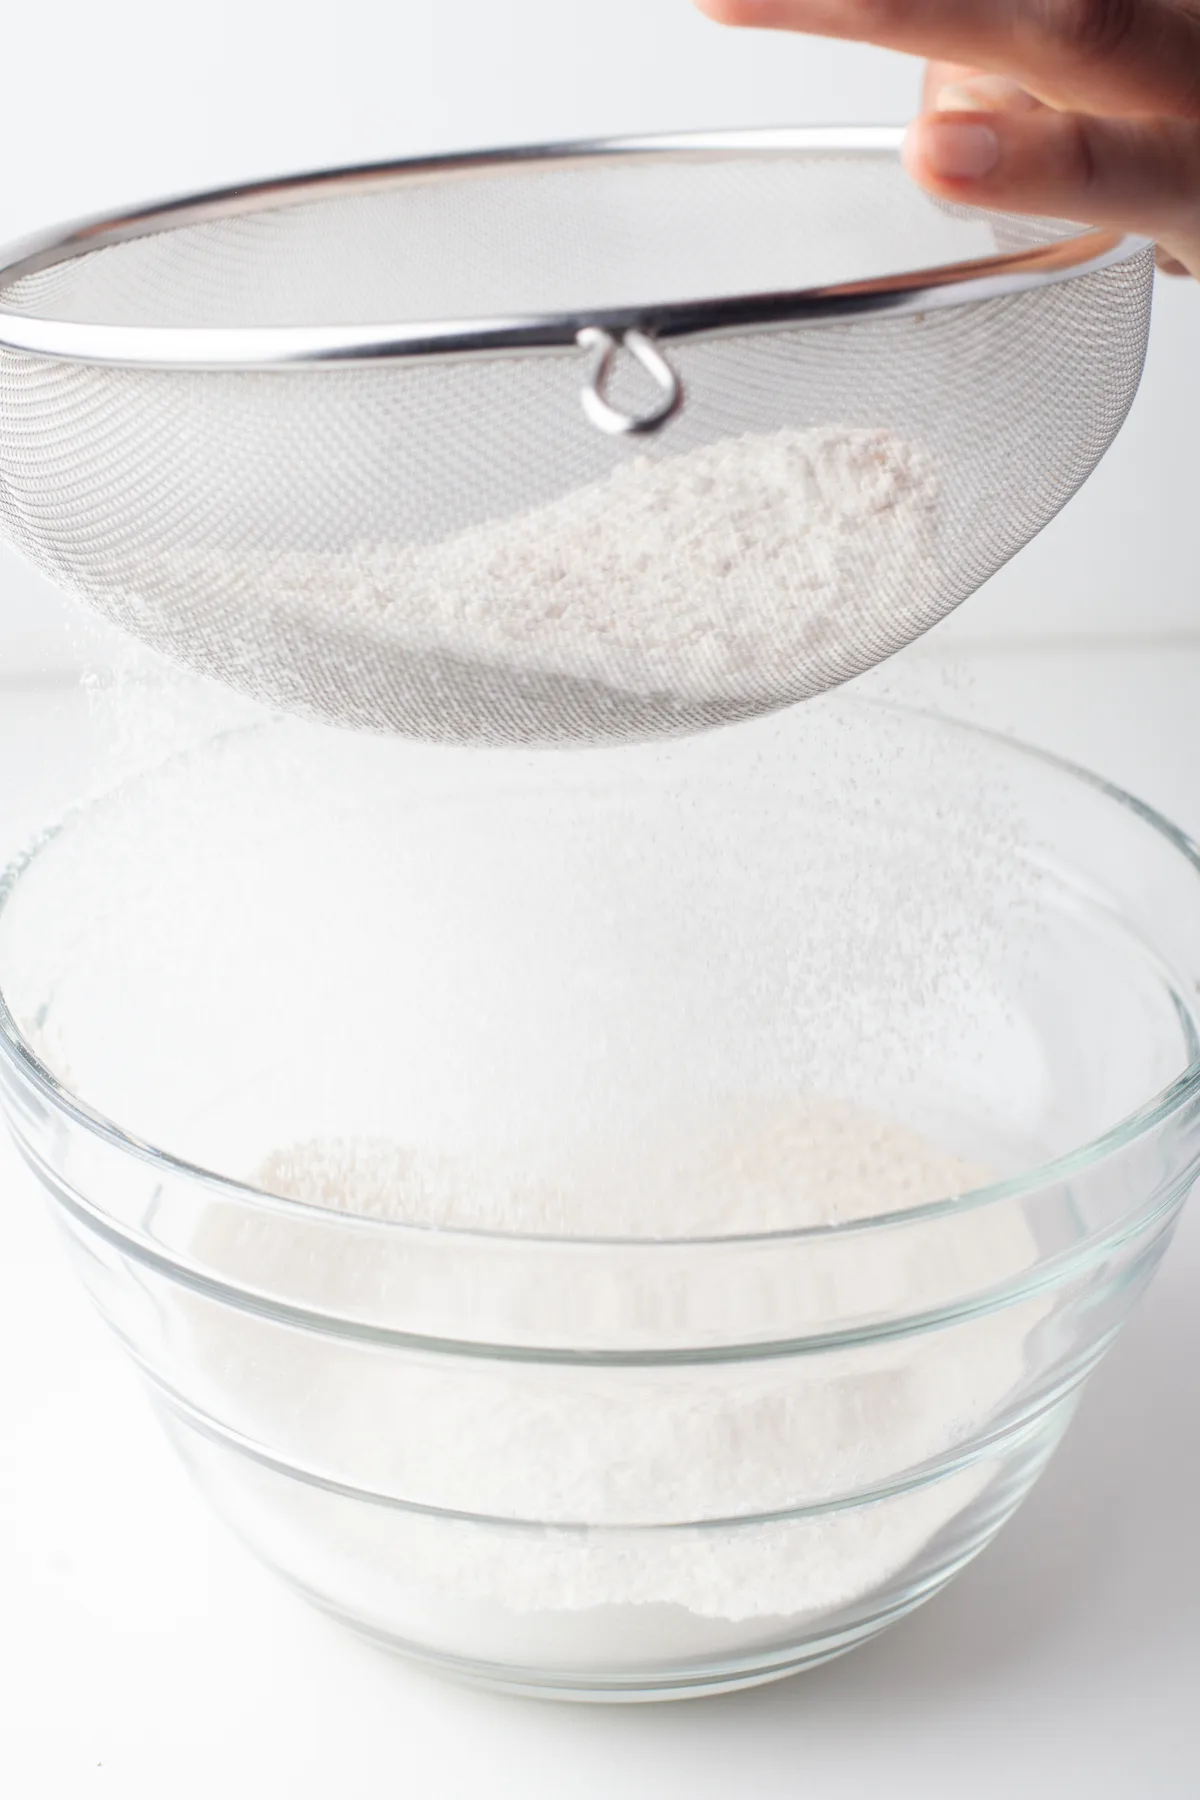 Sifting flour into a clear glass bowl